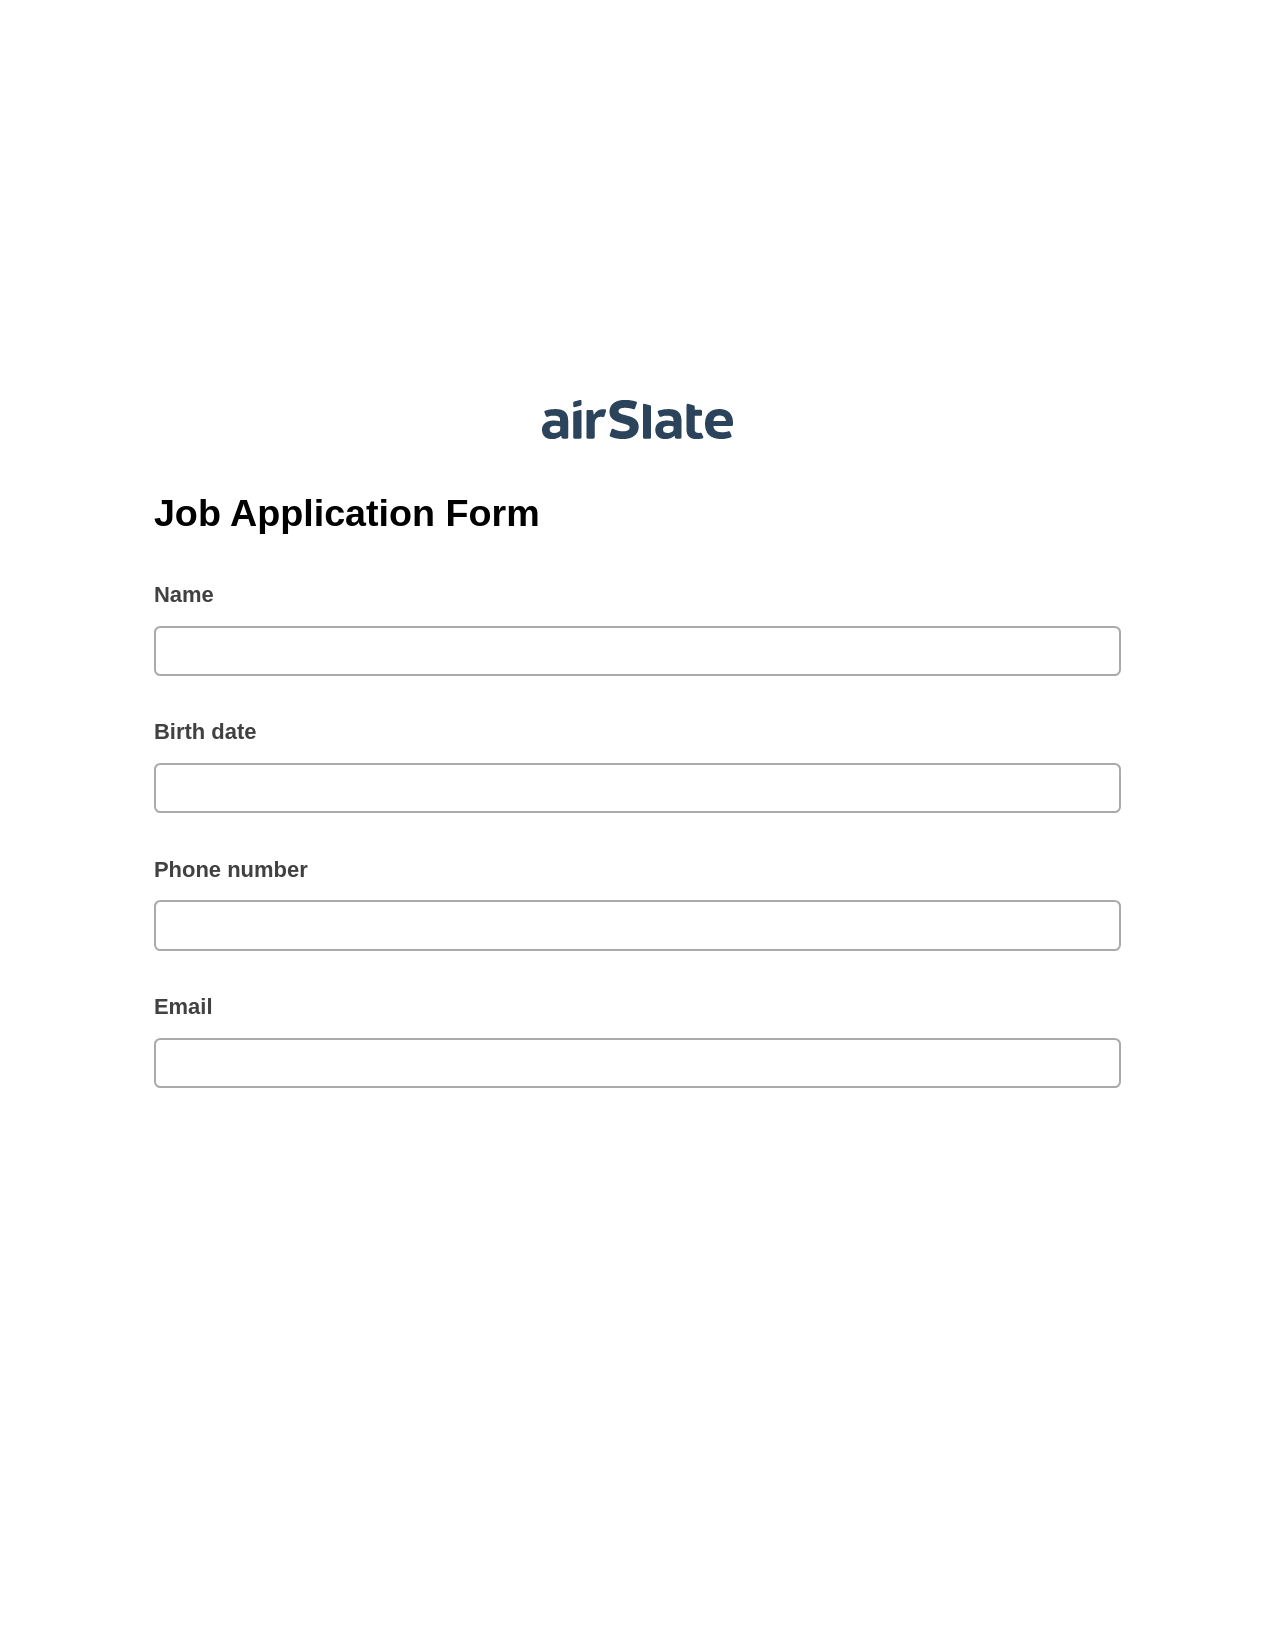 Job Application Form Pre-fill from CSV File Dropdown Options Bot, Create slate from another Flow Bot, Export to Excel 365 Bot